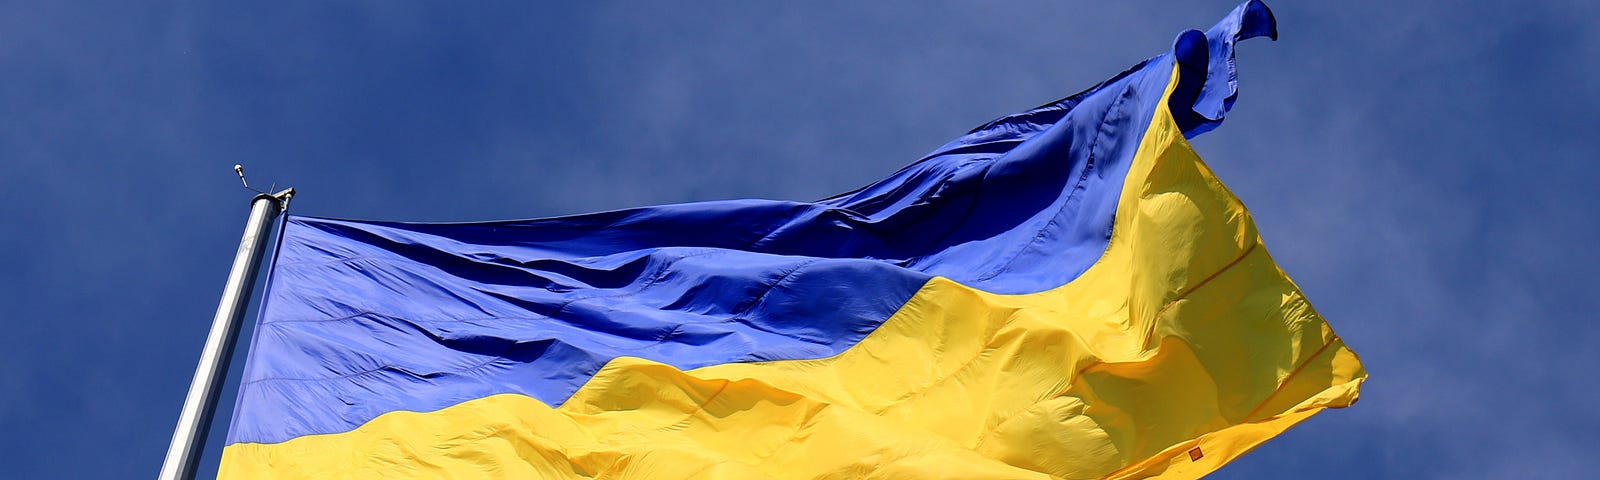 A photo of the bright blue and yellow Ukrainian flag flying agianst a blue sky.